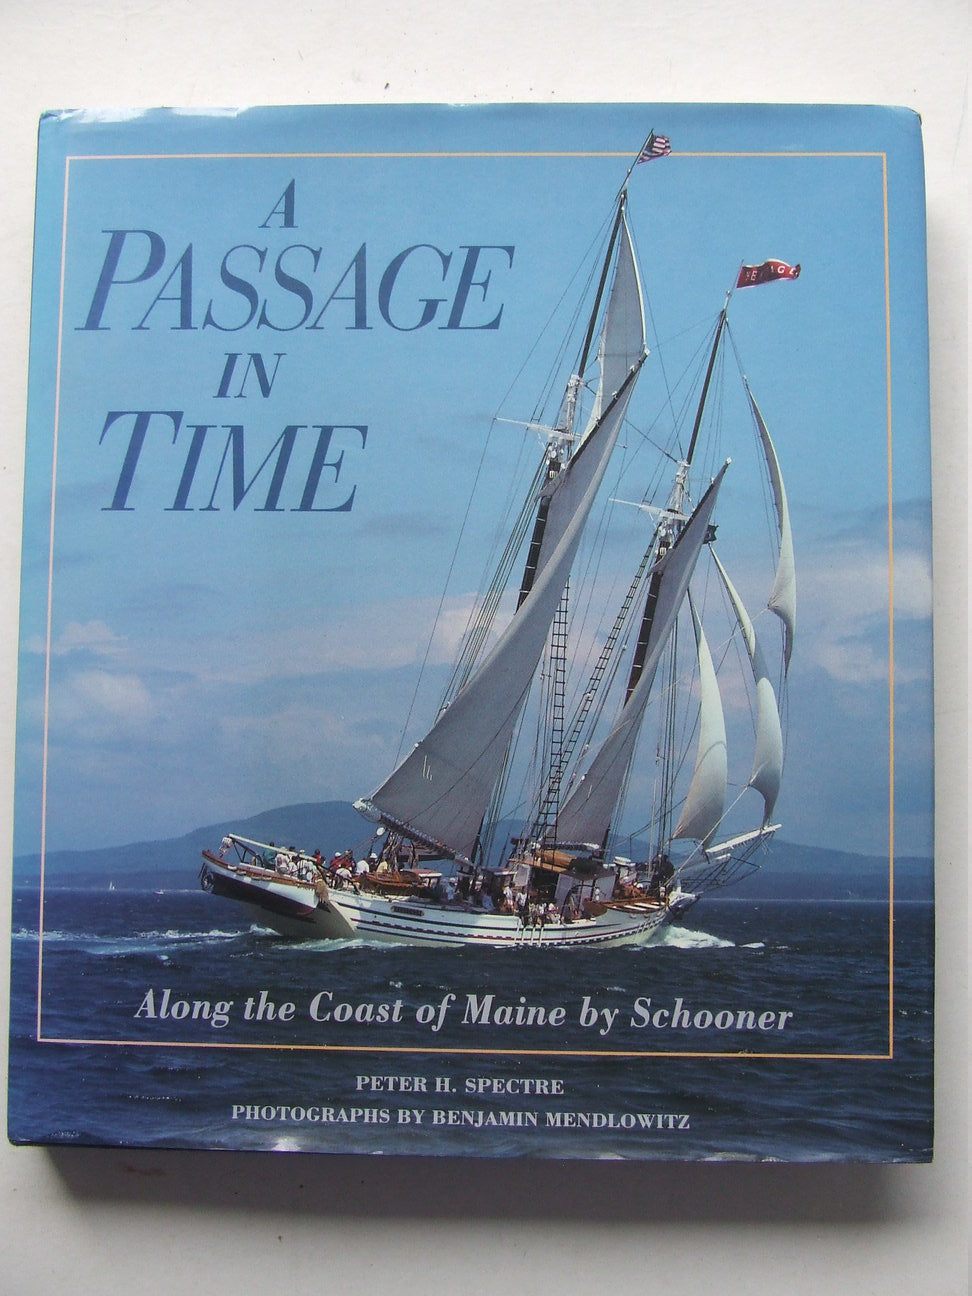 A Passage in Time, along the coast of Maine by schooner